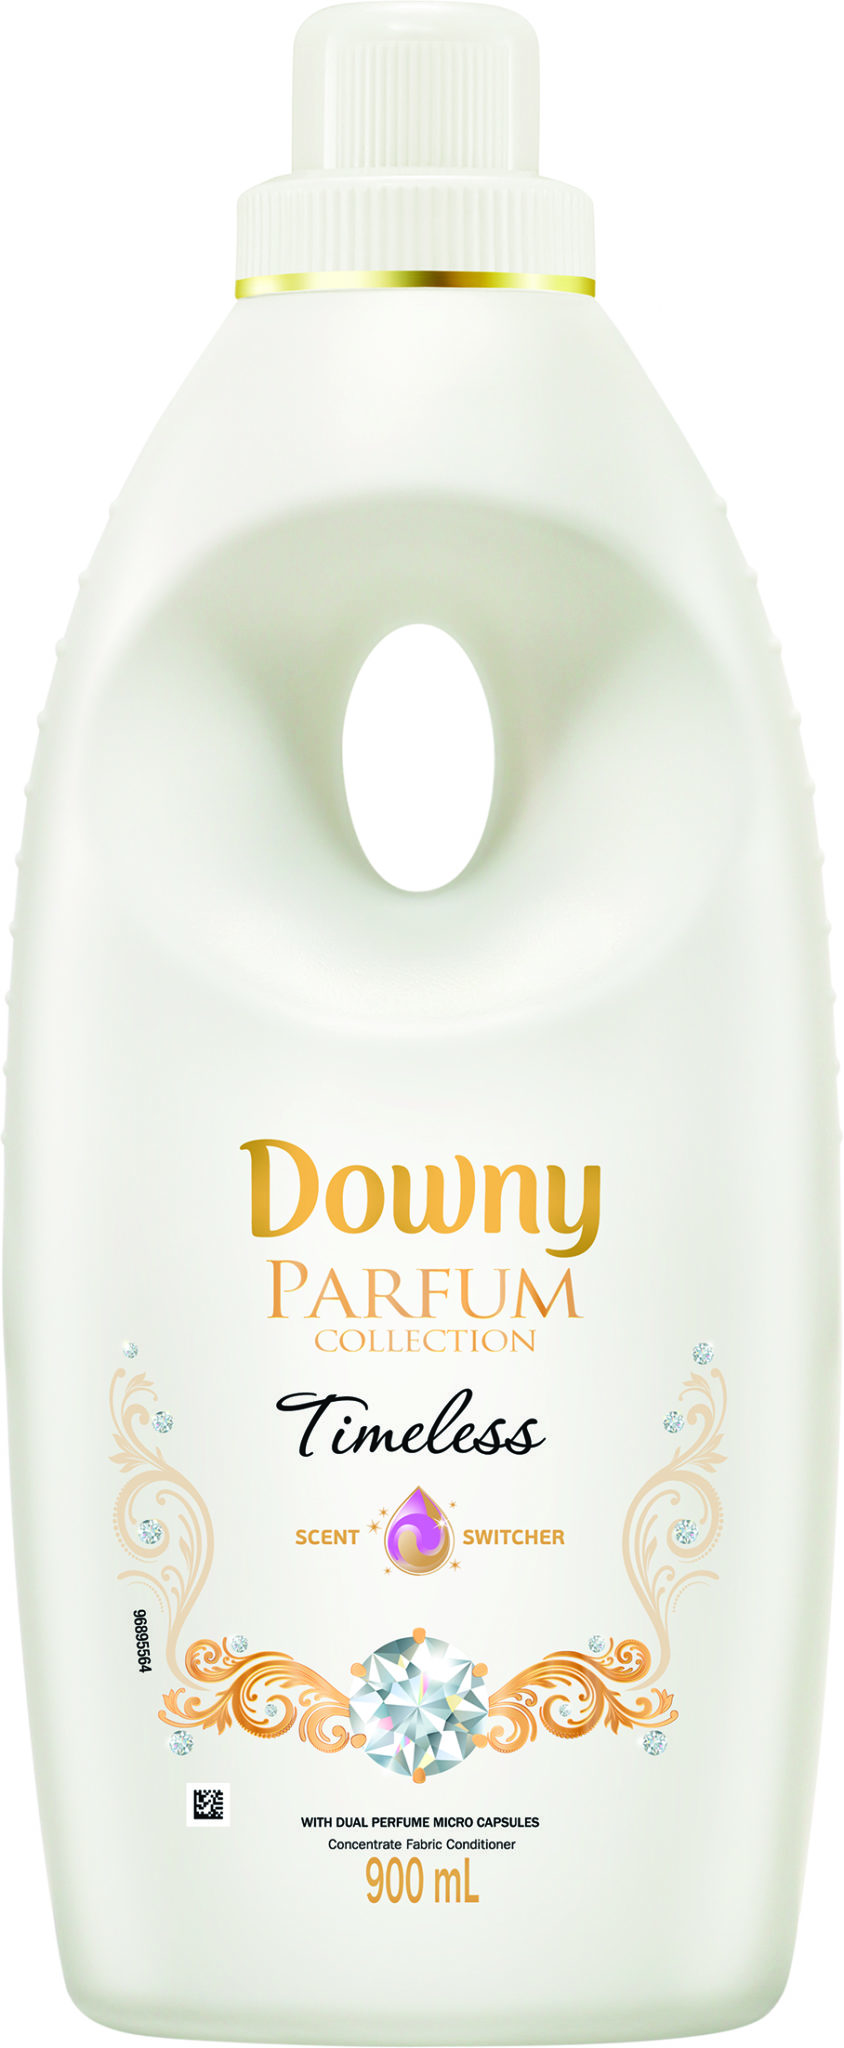 Downy Timeless SRP Php194.50 (900ml), Php 410.60 (1.8L)